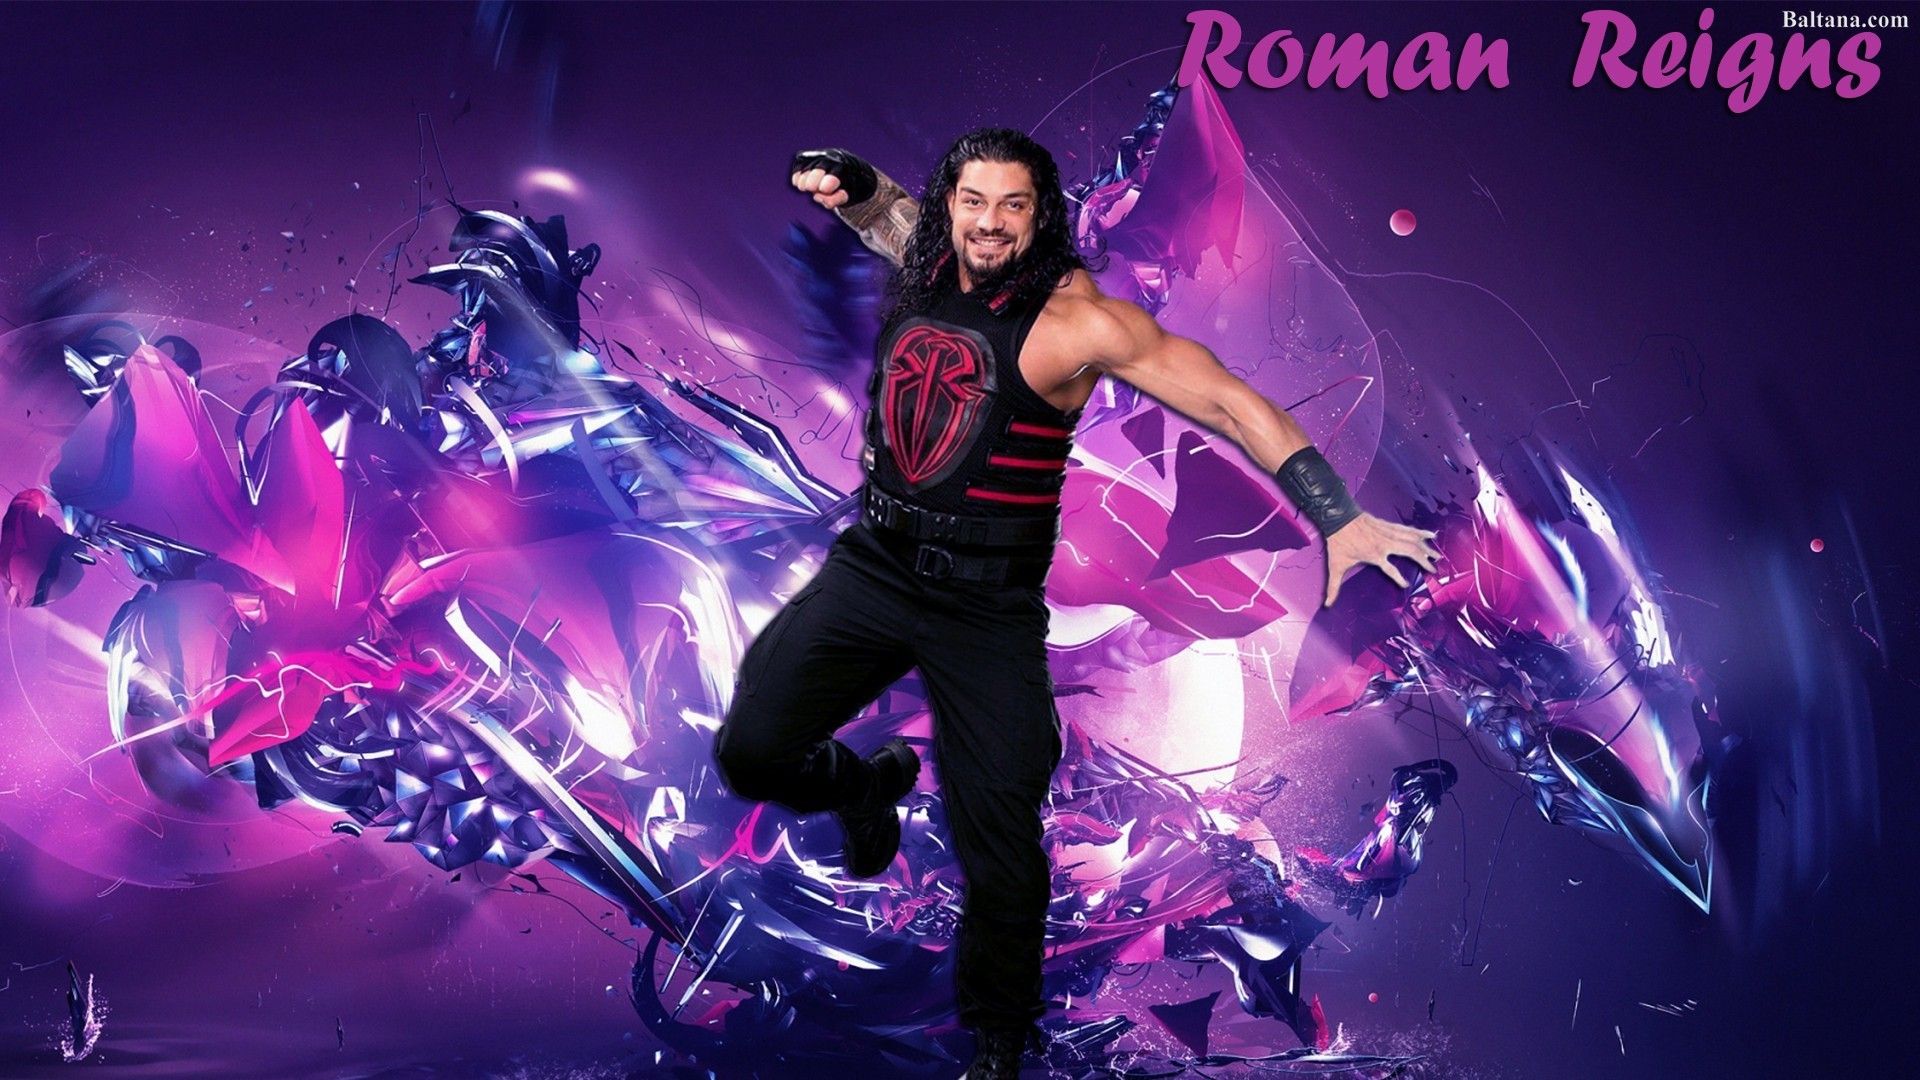 The Rock And Roman Reigns Wallpaper